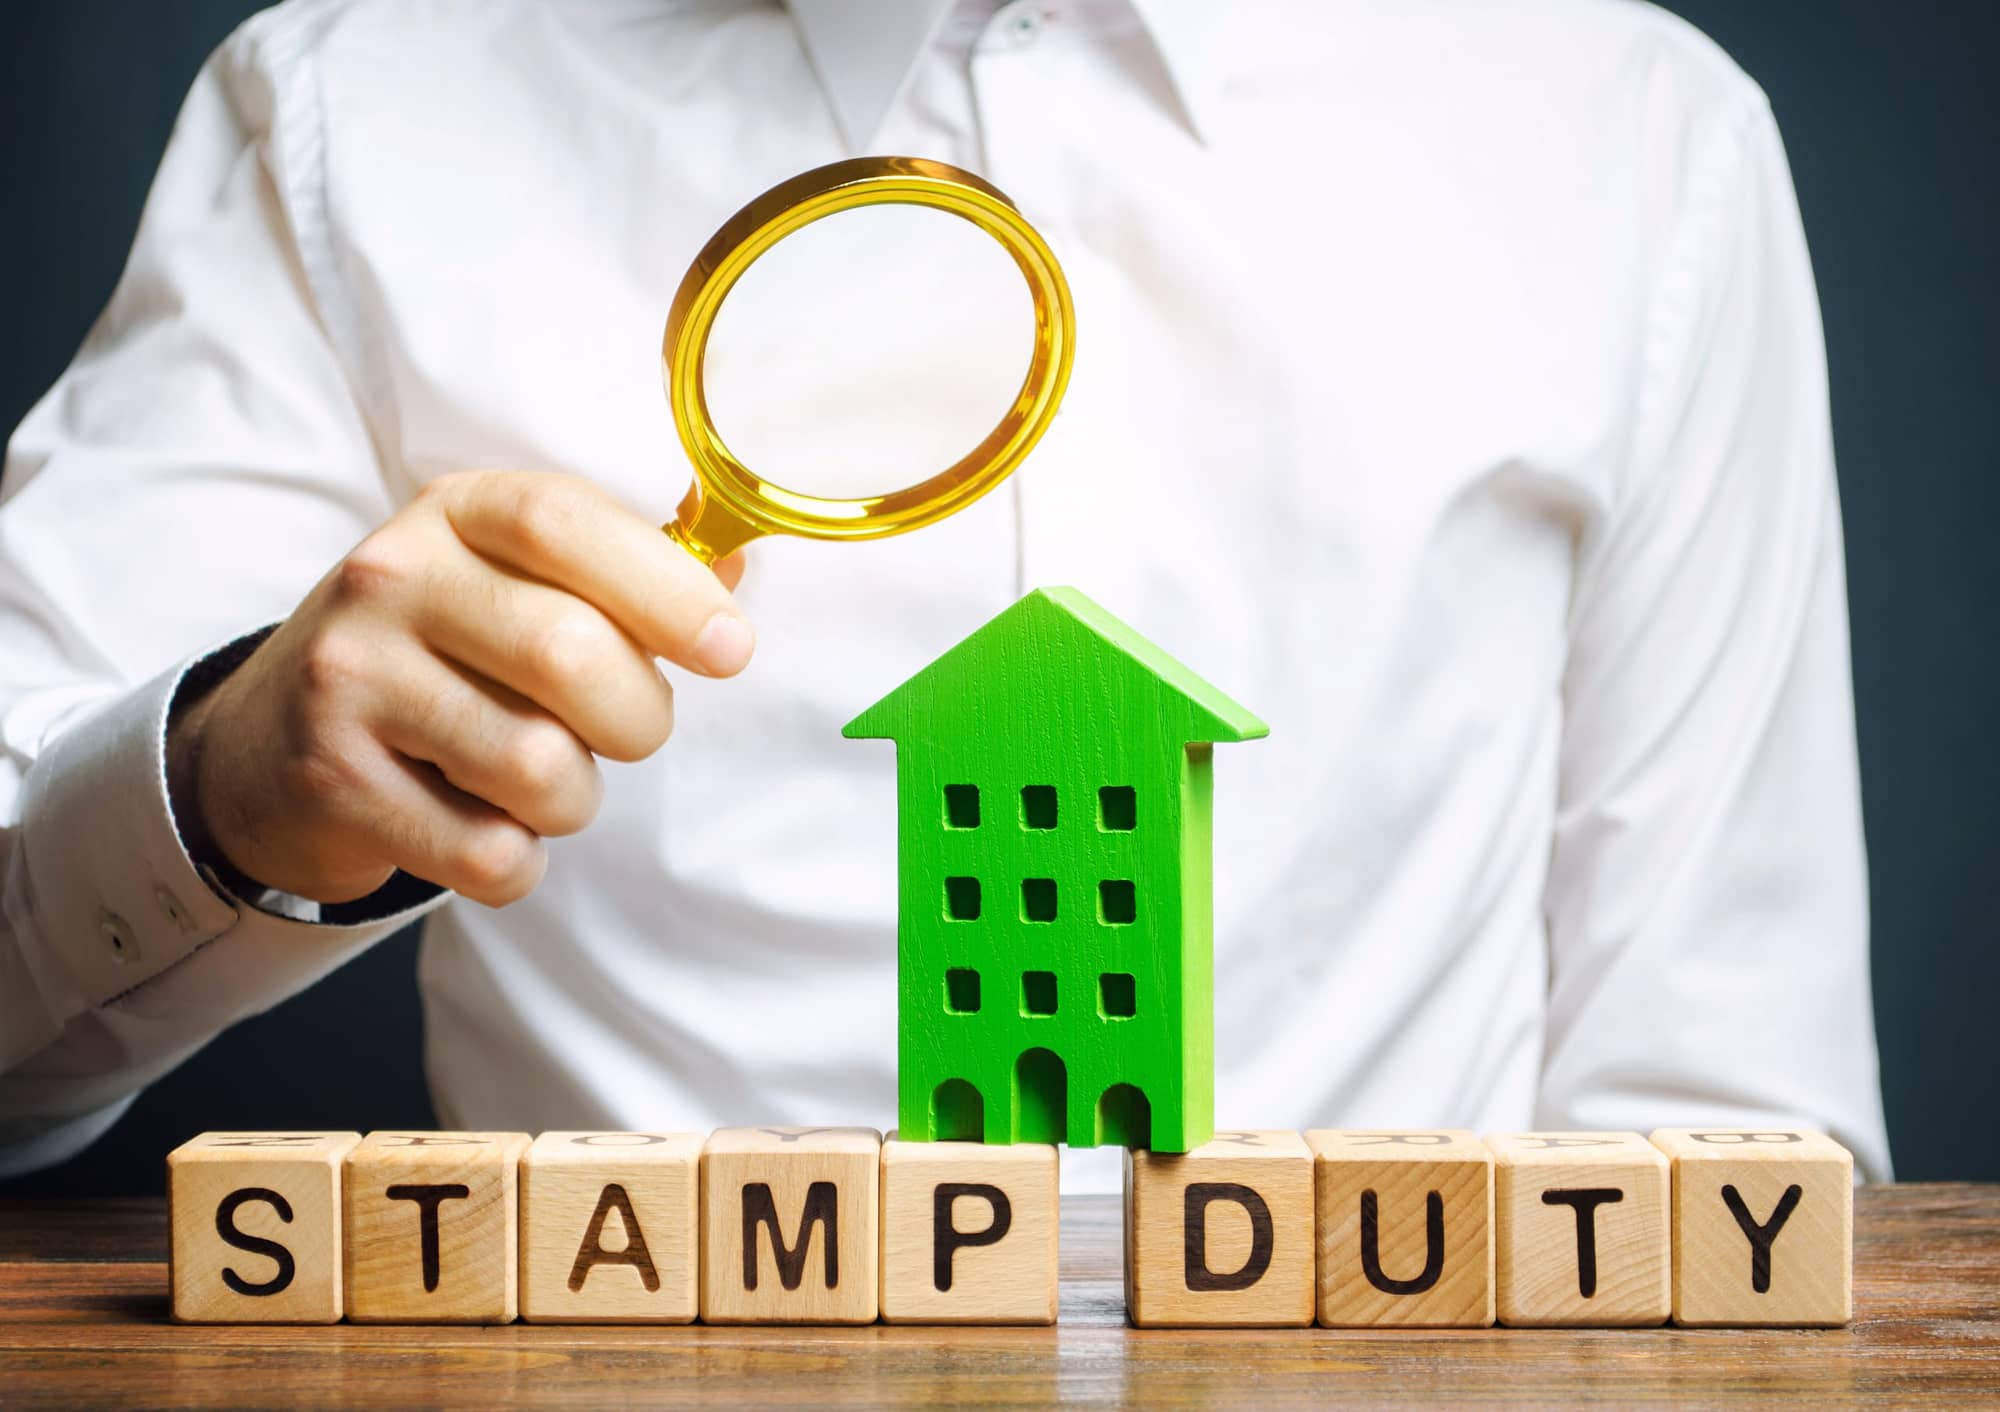 UK Stamp Duty - UK Property Investors And non-resident investors